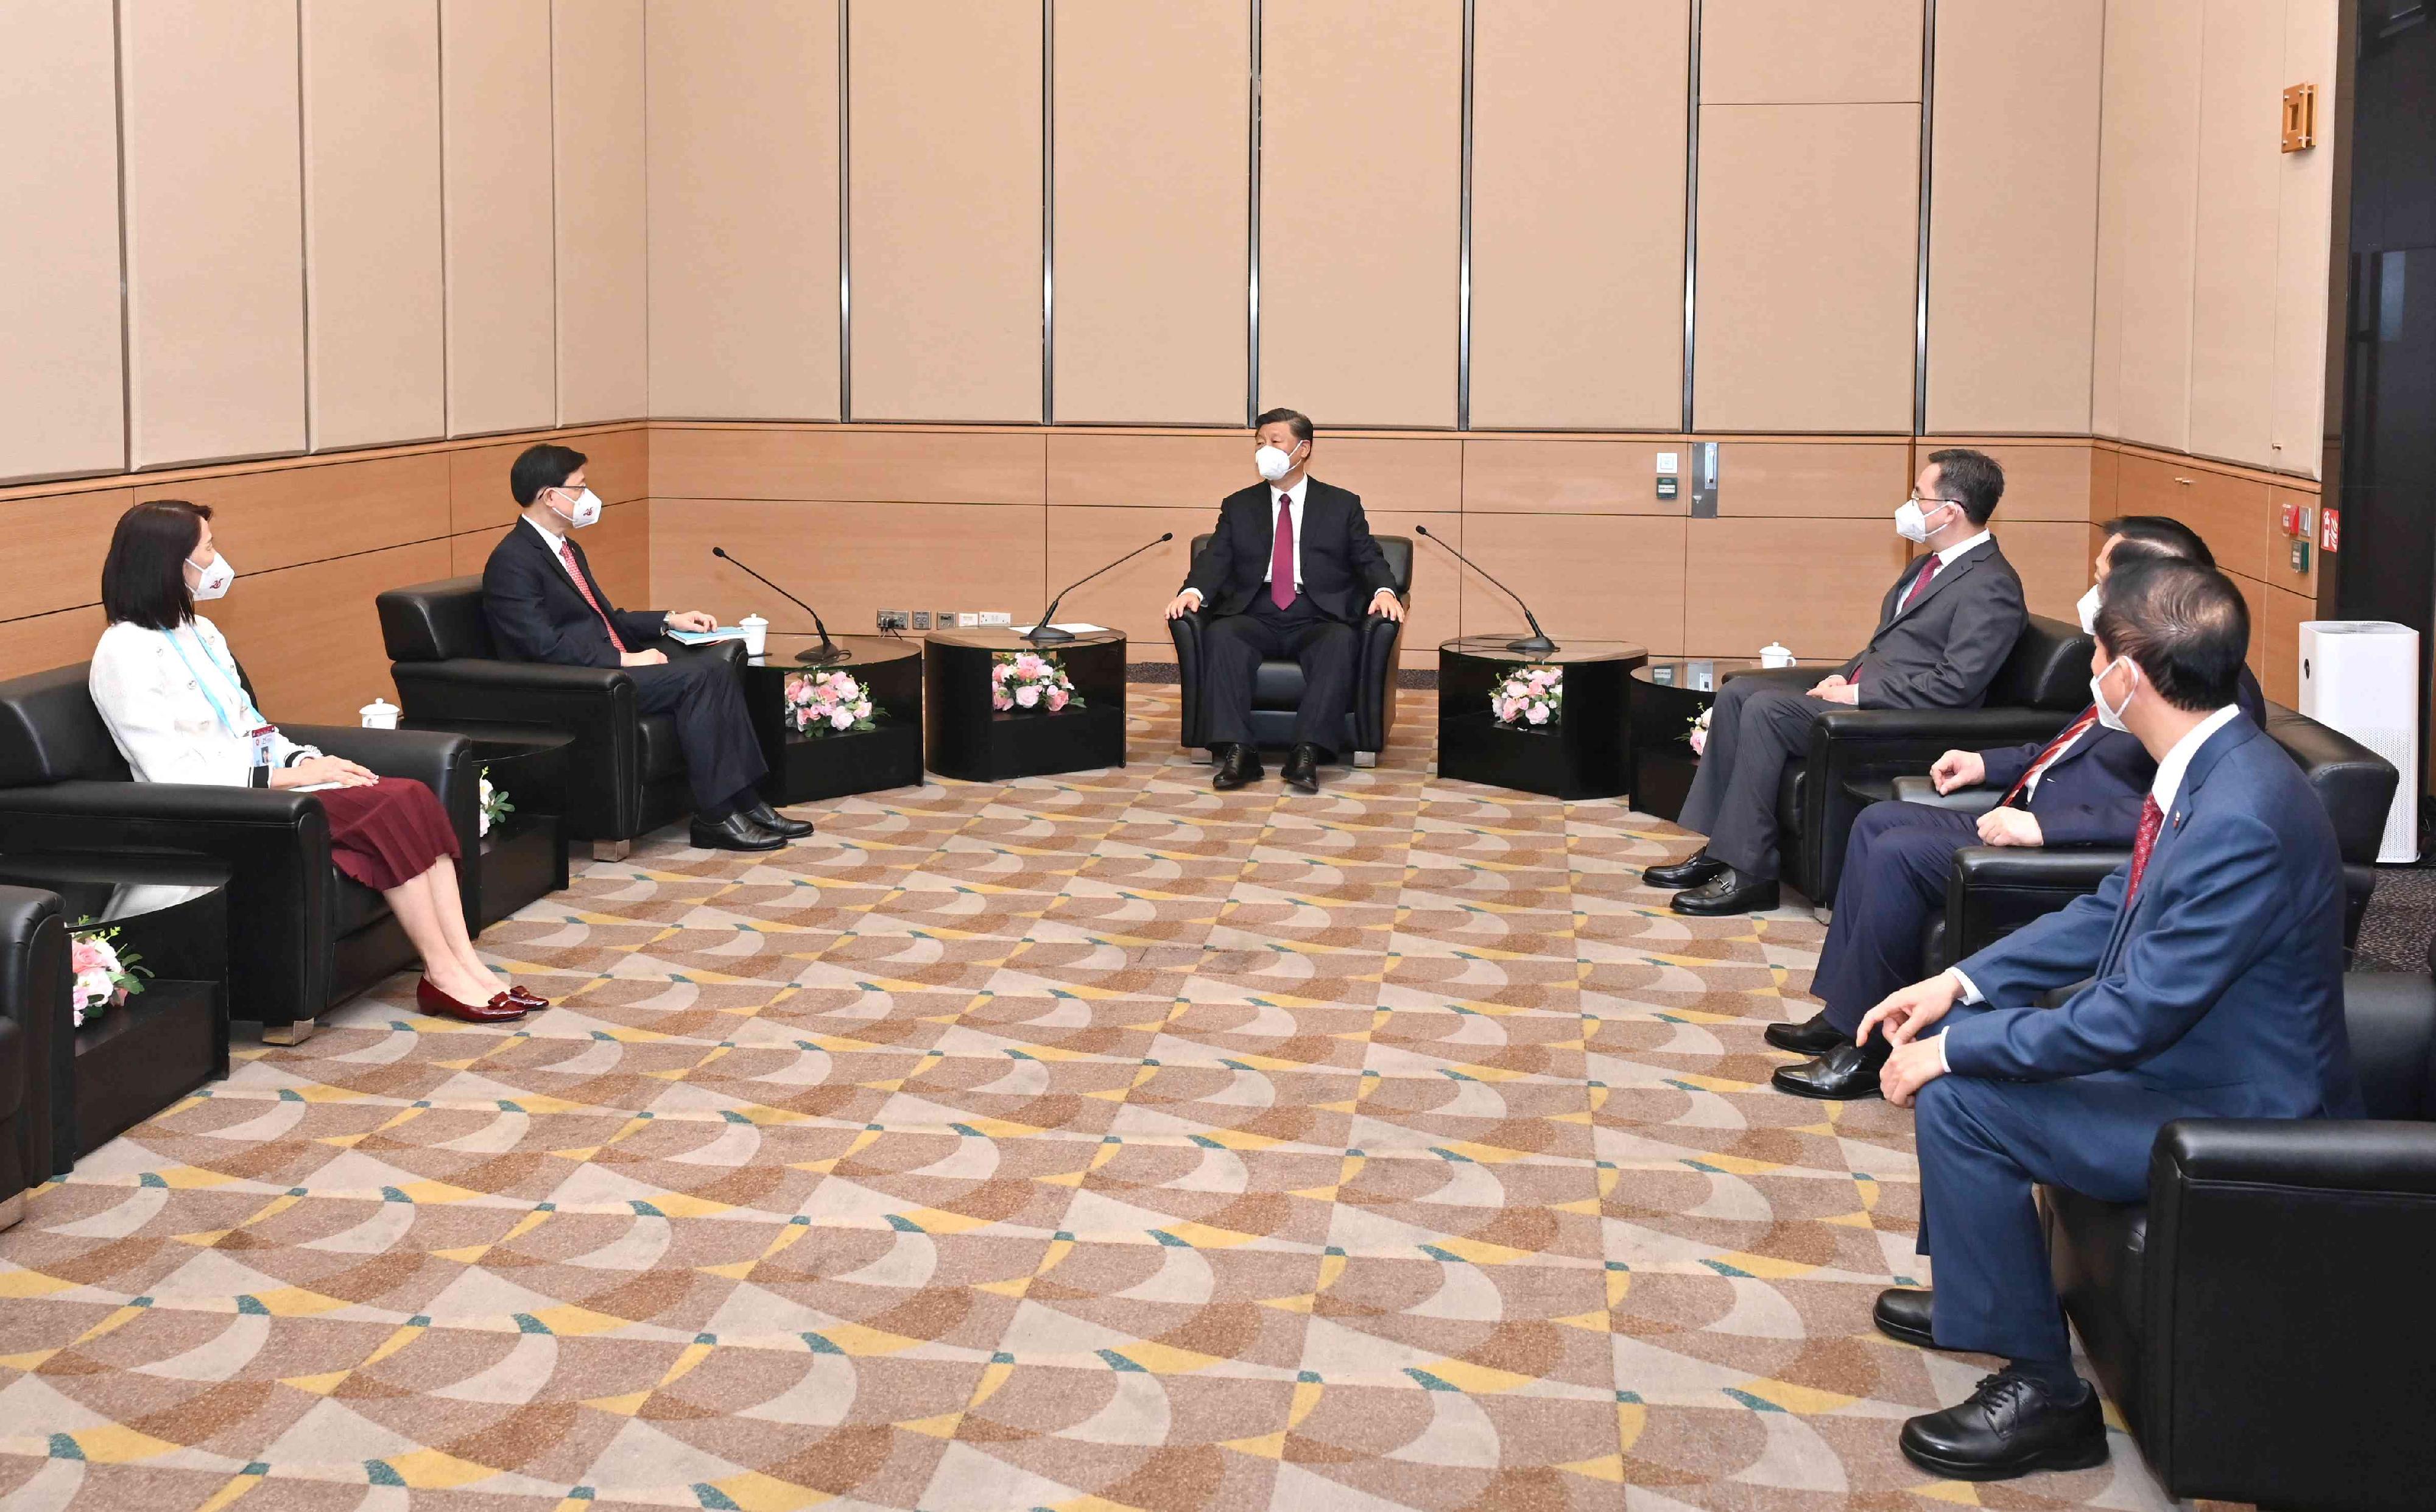 President Xi Jinping (third left) met with the new Chief Executive, Mr John Lee (second left), today (July 1) at the Hong Kong Convention and Exhibition Centre. Member of the Political Bureau of the Communist Party of China (CPC) Central Committee, Member of the Secretariat of the CPC Central Committee, and the Director of the General Office of the CPC Central Committee, Mr Ding Xuexiang (third right); Vice-Chairman of the National Committee of the Chinese People's Political Consultative Conference and the Director of the Hong Kong and Macao Affairs Office of the State Council, Mr Xia Baolong (second right); the Director of the Liaison Office of the Central People's Government in the Hong Kong Special Administrative Region, Mr Luo Huining (first right); and the new Director of the Chief Executive's Office, Ms Carol Yip (first left), were also present.
